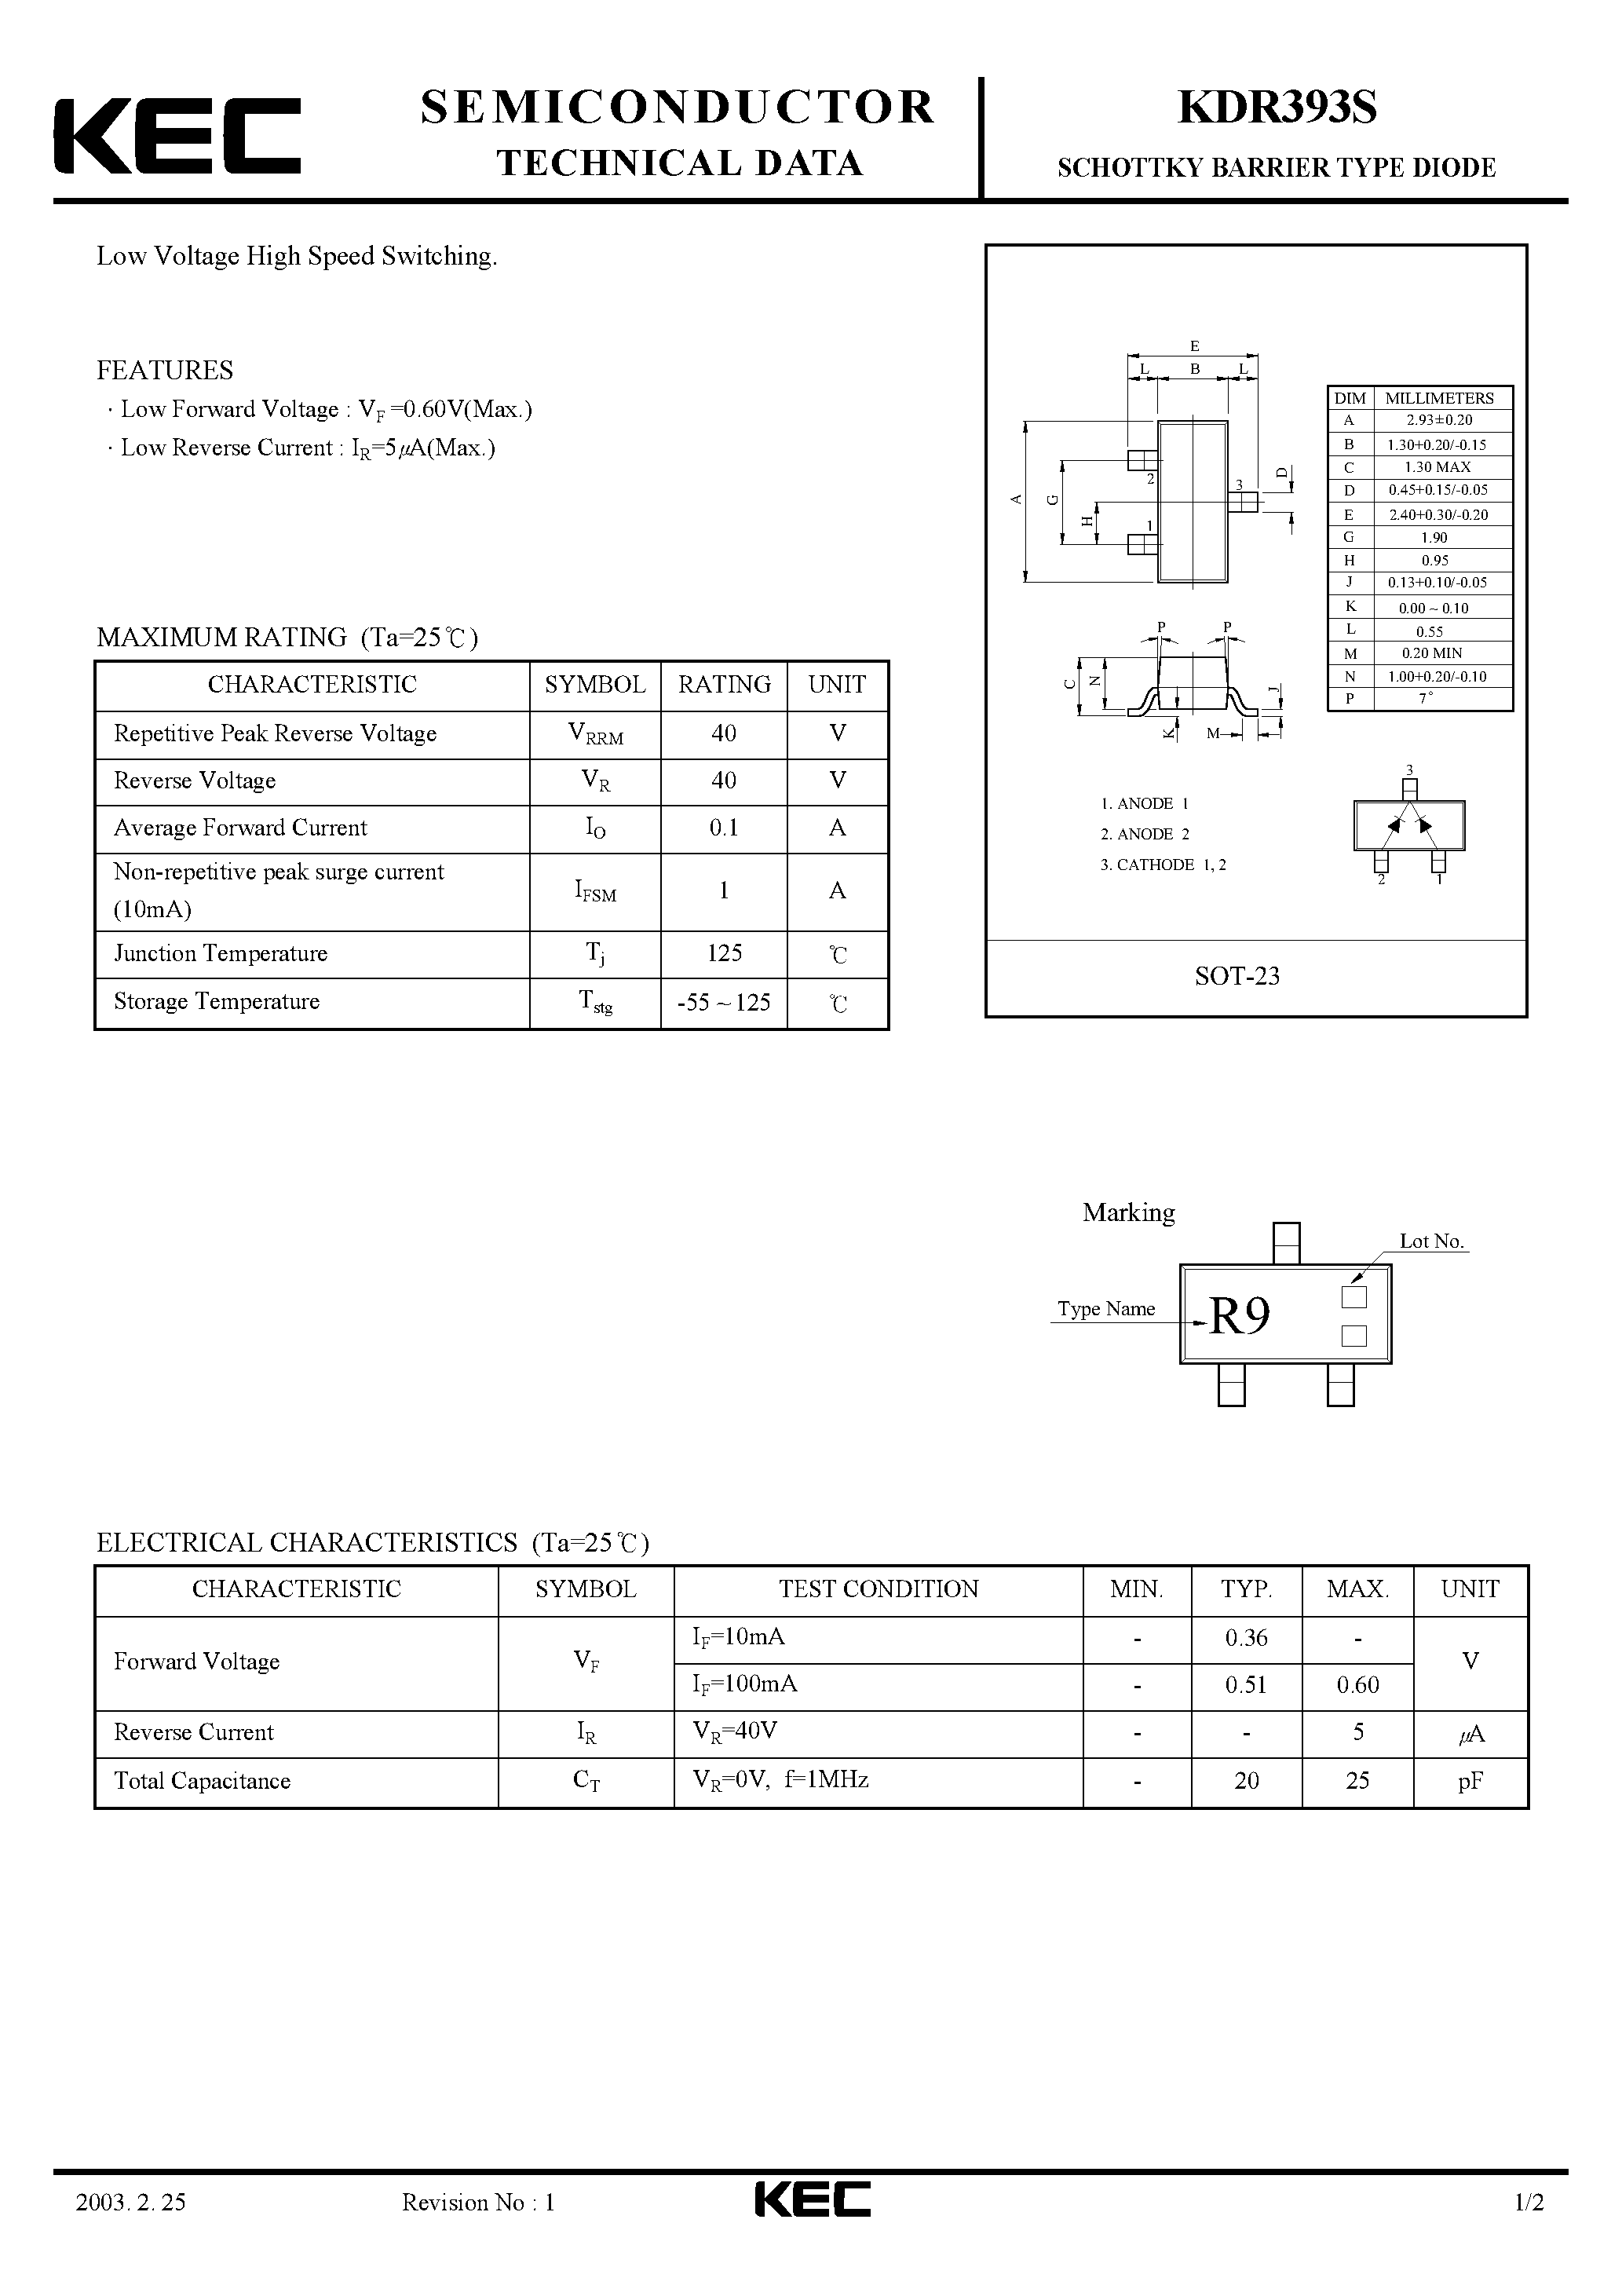 Datasheet KDR393S - SCHOTTKY BARRIER TYPE DIODE(LOW VOLTAGE HIGH SPEED SWITCHING) page 1